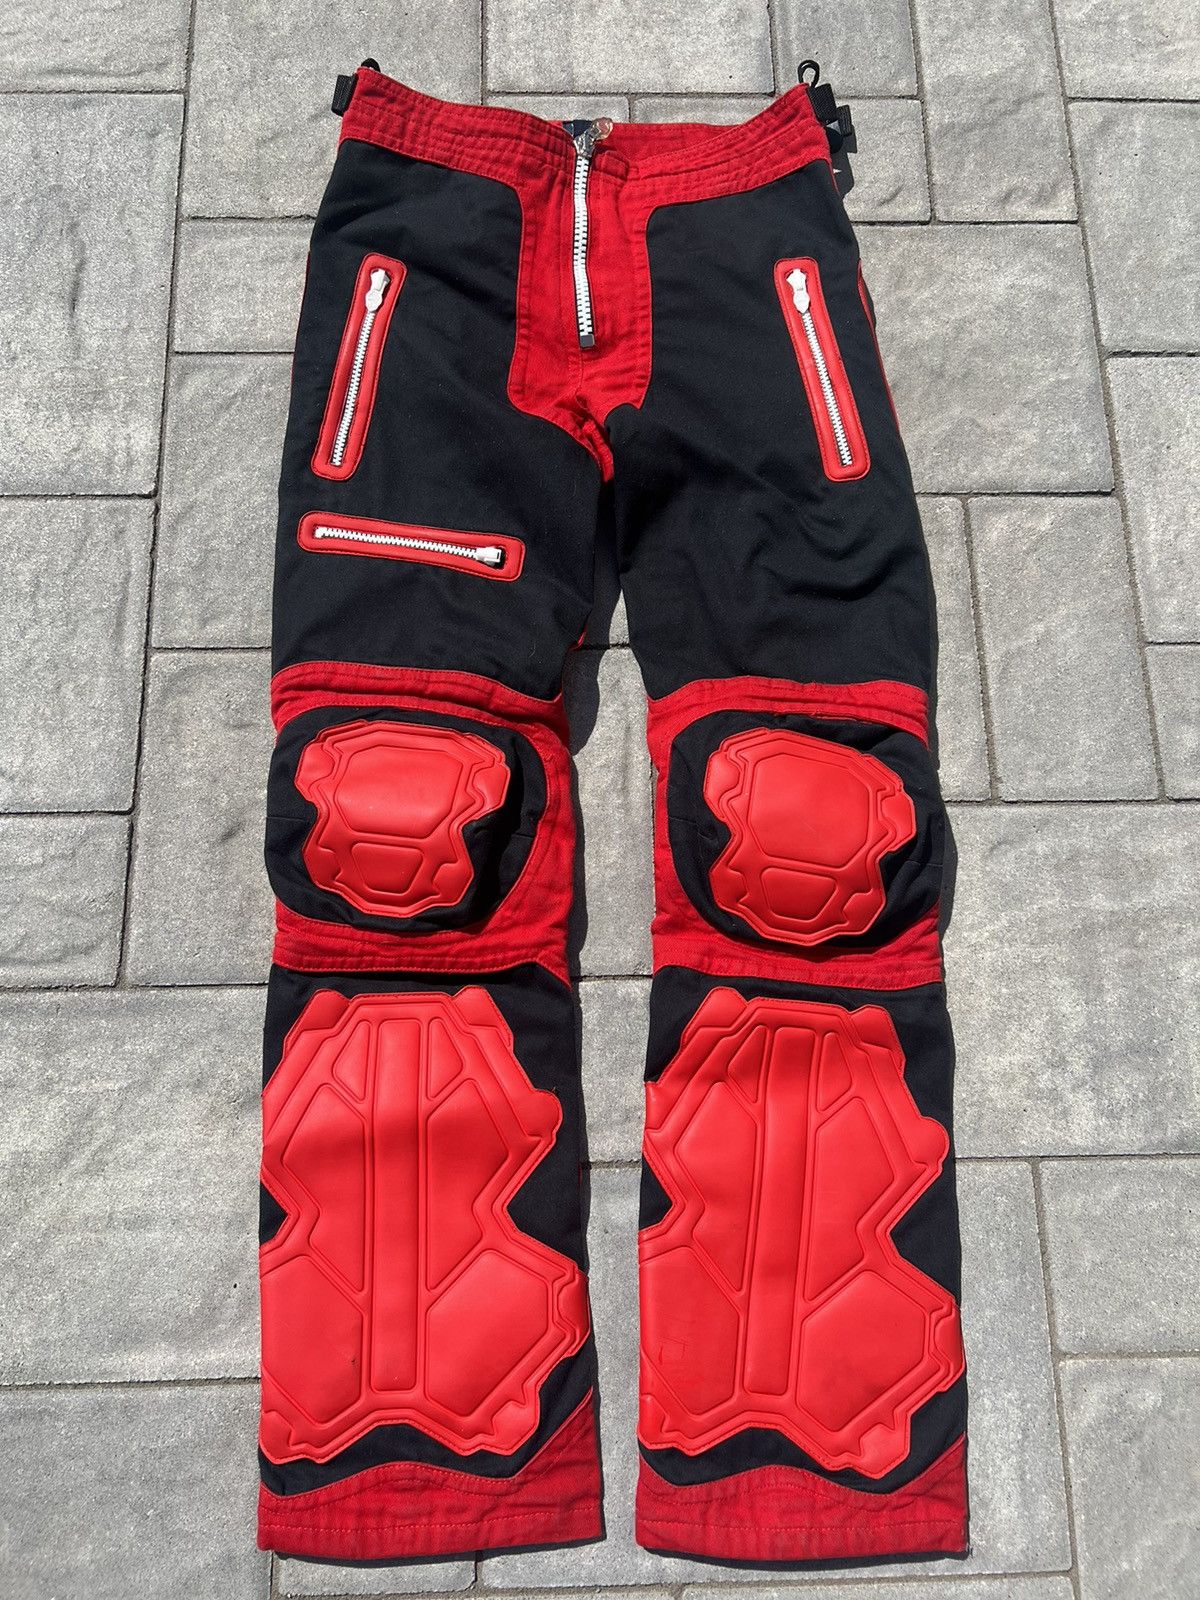 Pre-owned Craig Morrison X If Six Was Nine Cyberdog Armor Plated Rave Pants In Red